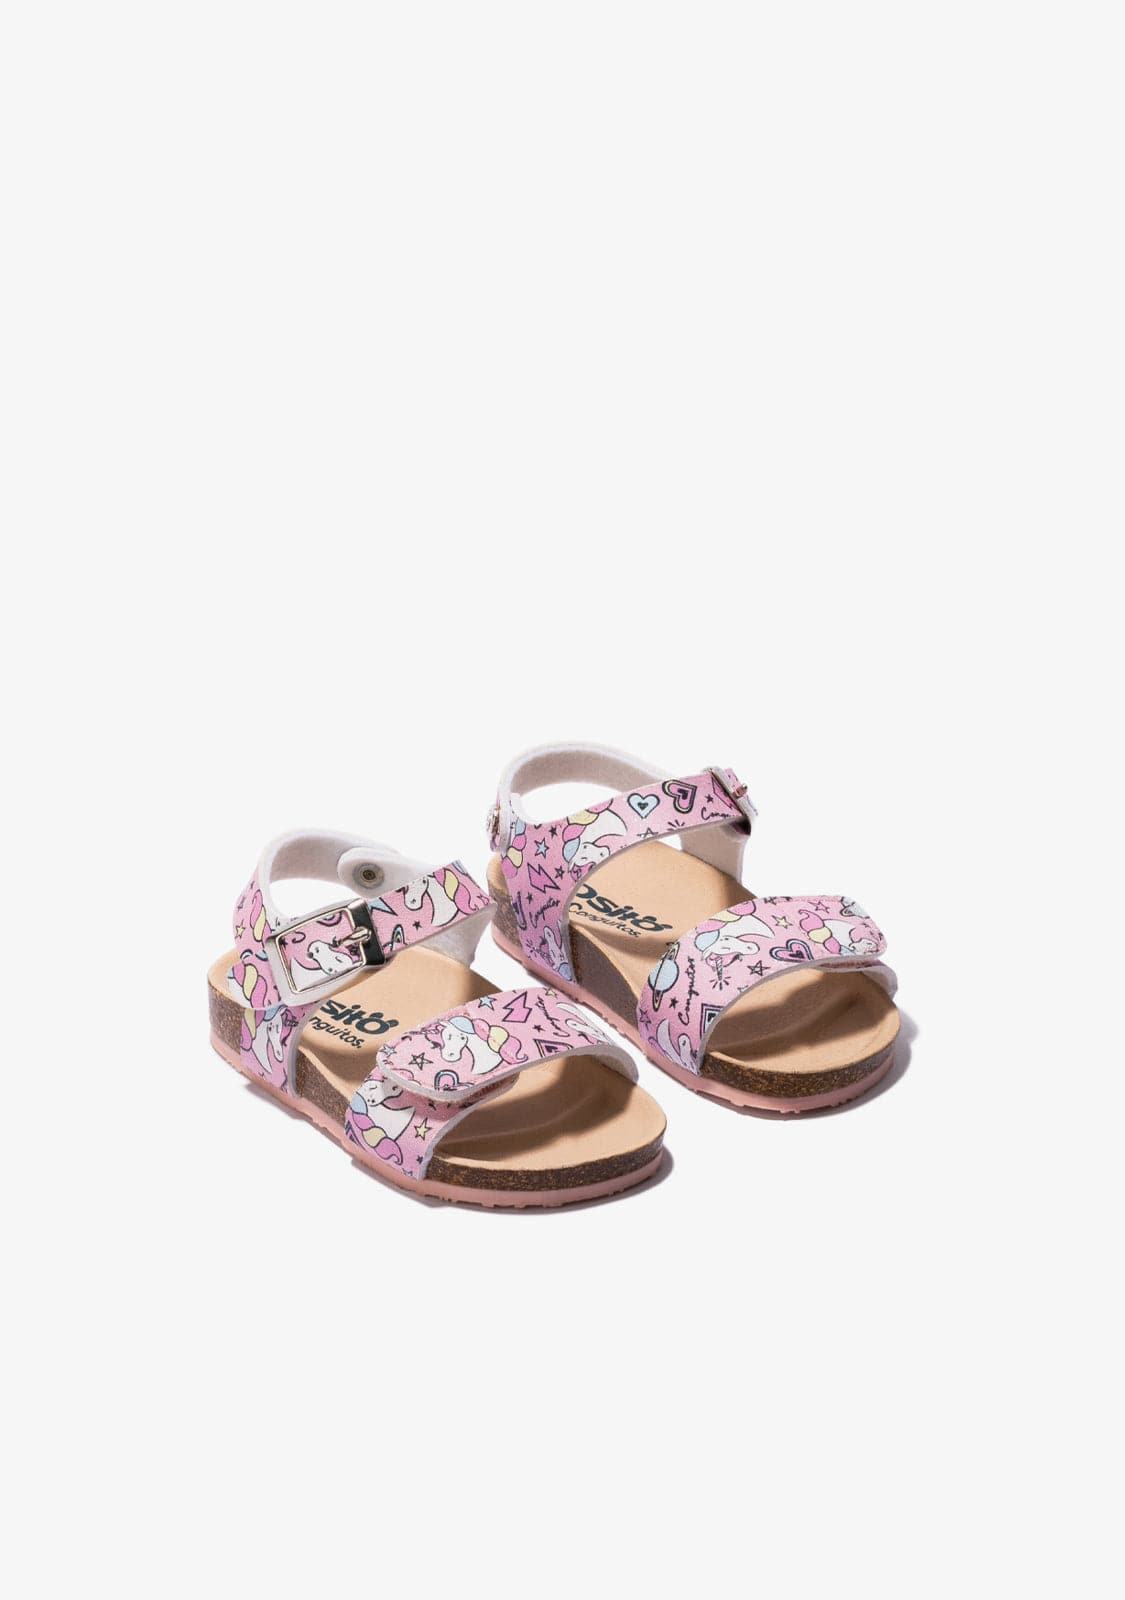 OSITO Shoes Baby's Pink Bio Unicorn Sandals